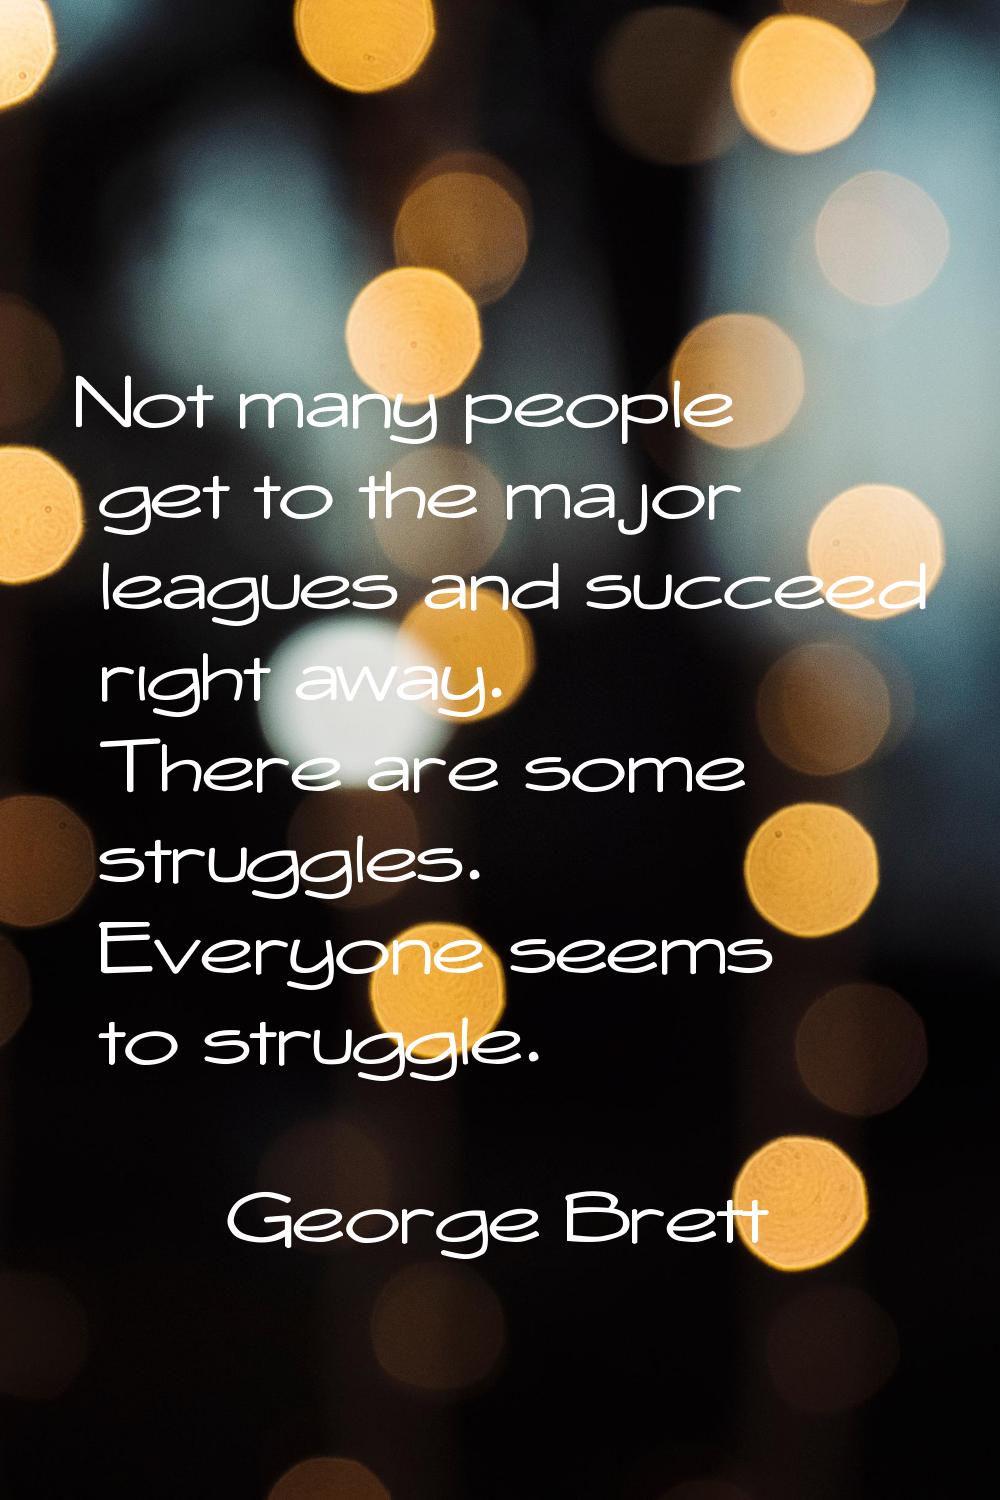 Not many people get to the major leagues and succeed right away. There are some struggles. Everyone